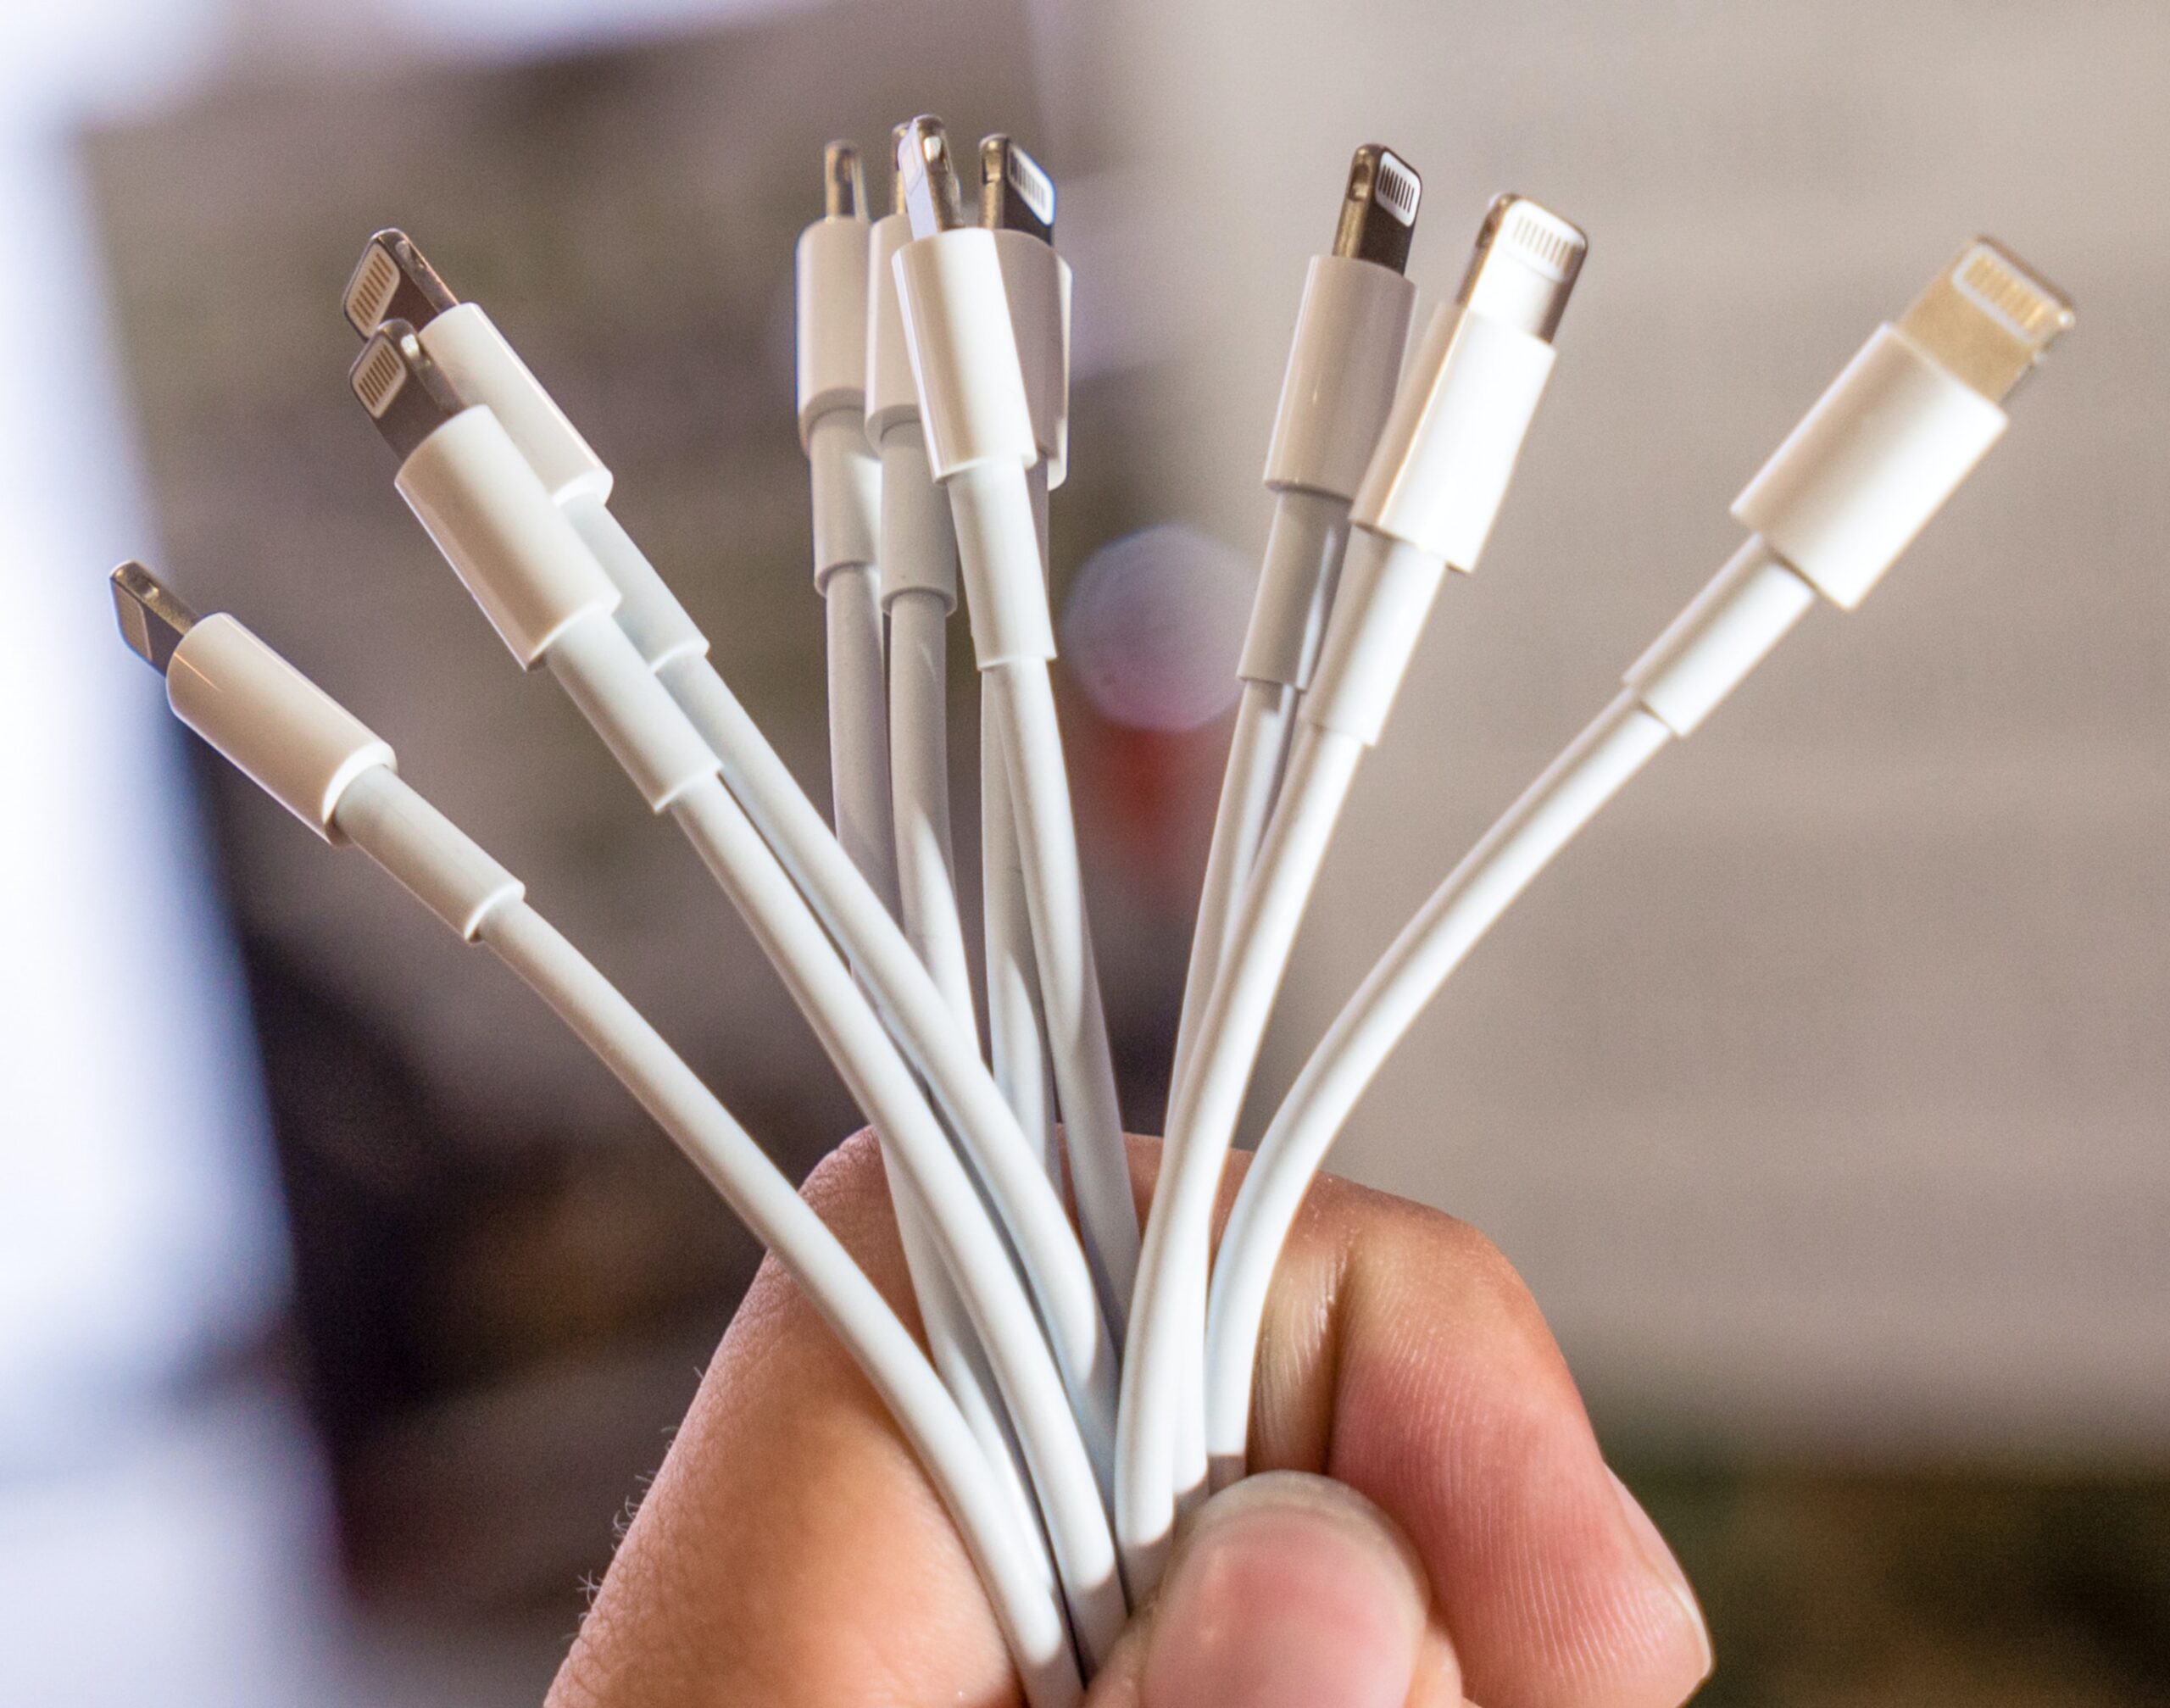  lightning cables